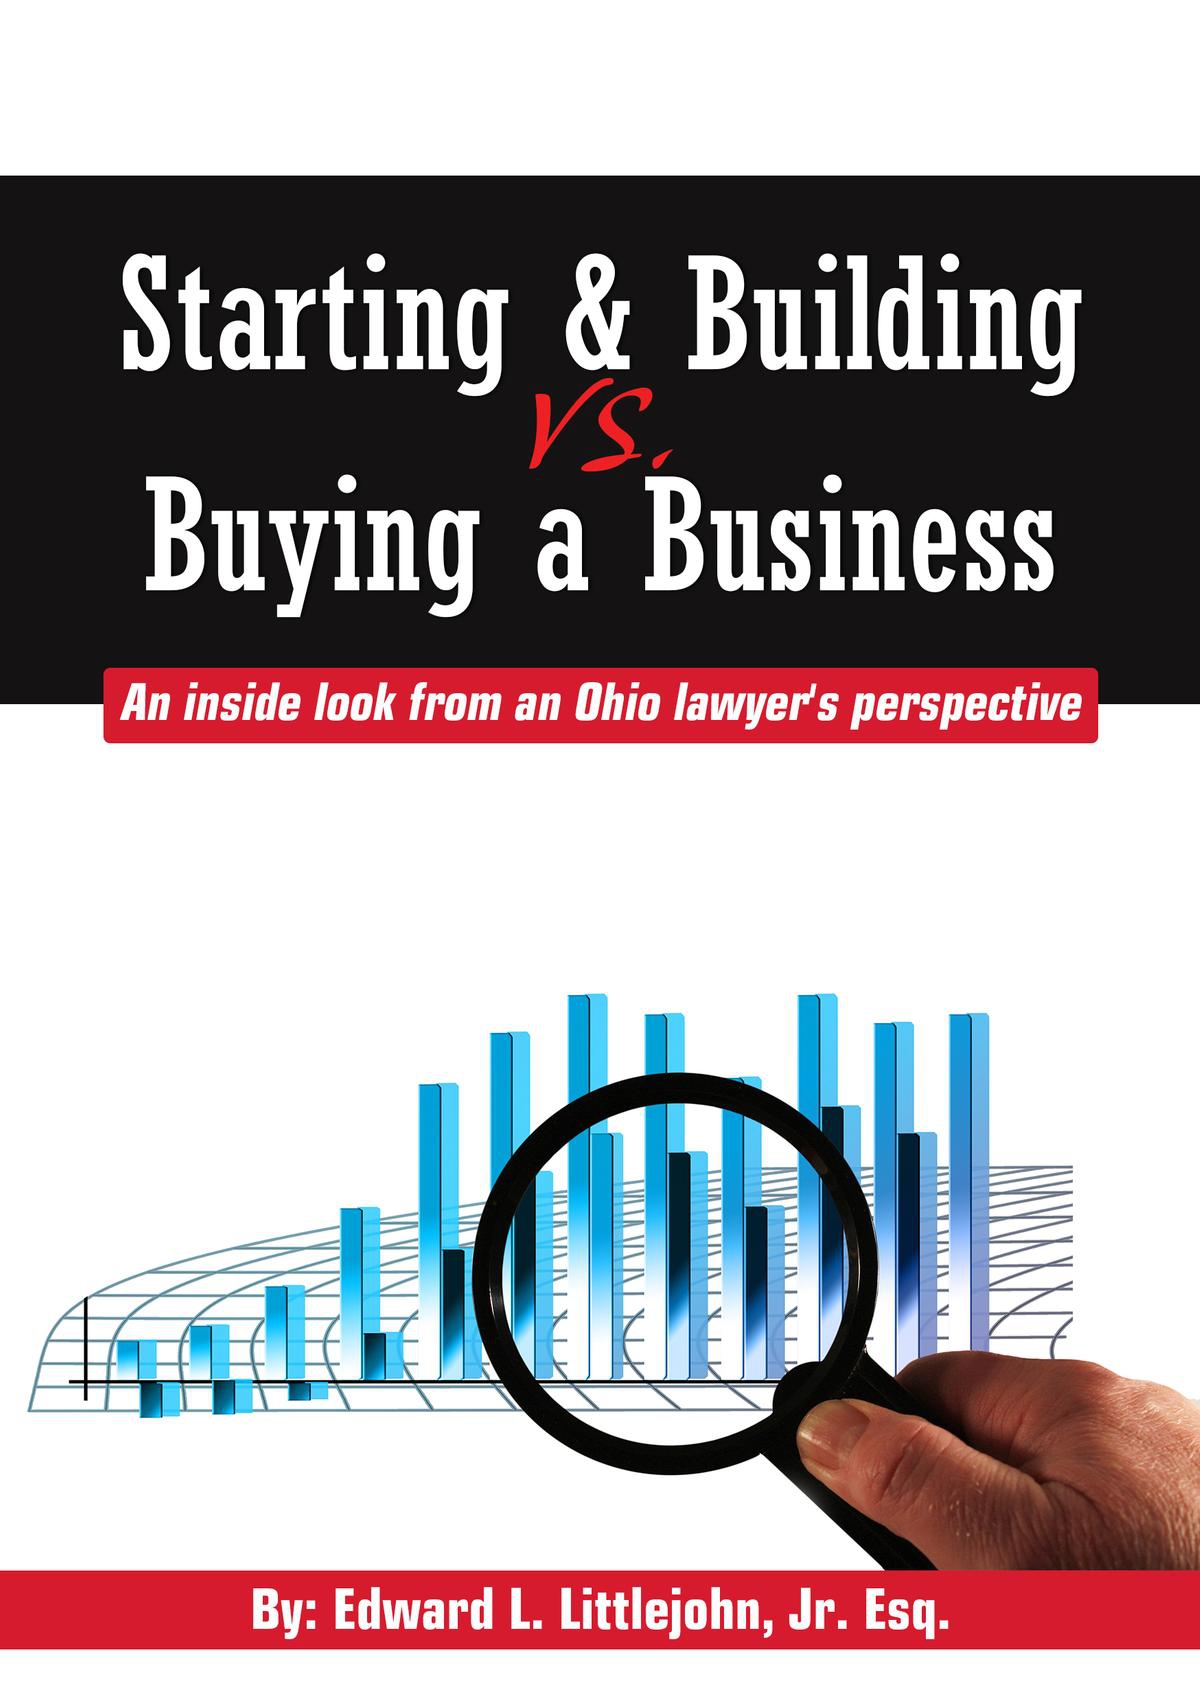 Ohio lawyer discusses differences between buying and building a business